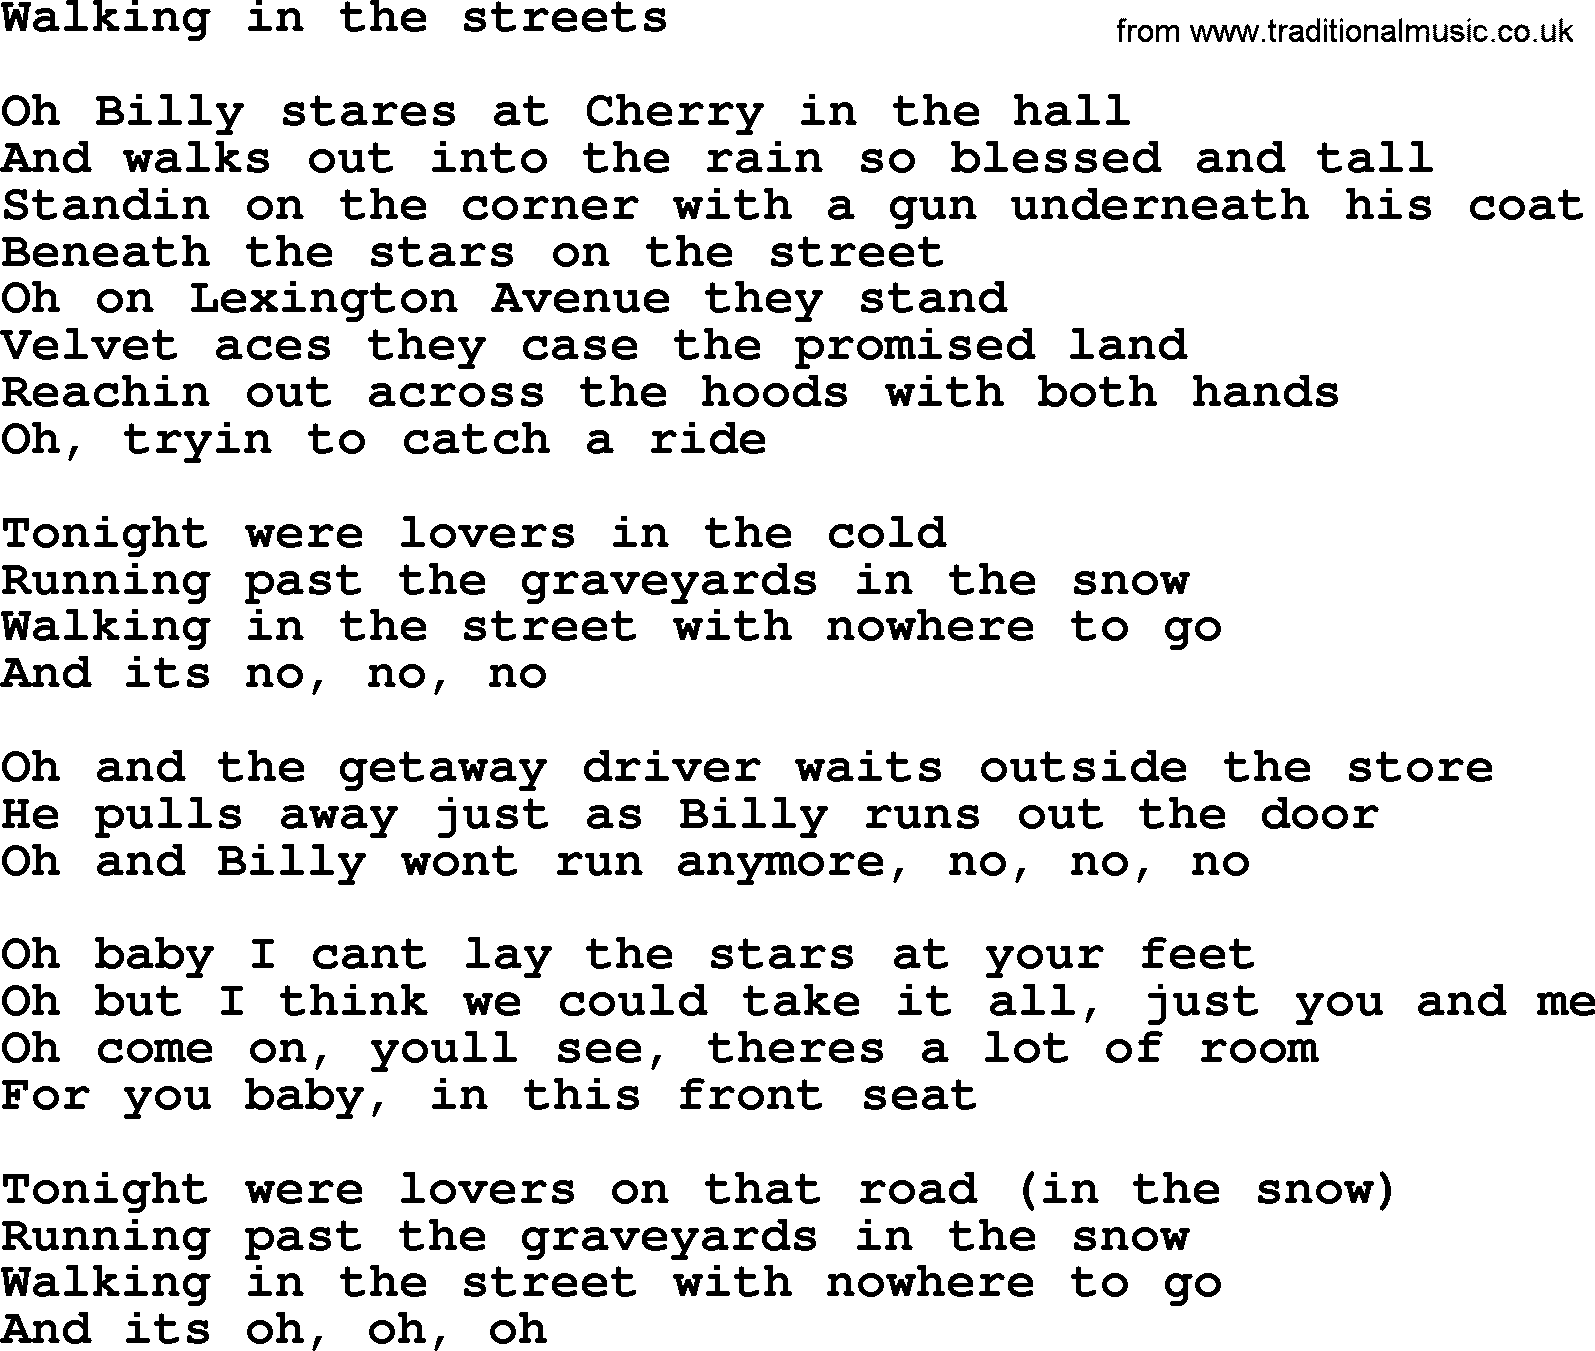 Bruce Springsteen song: Walking In The Streets lyrics